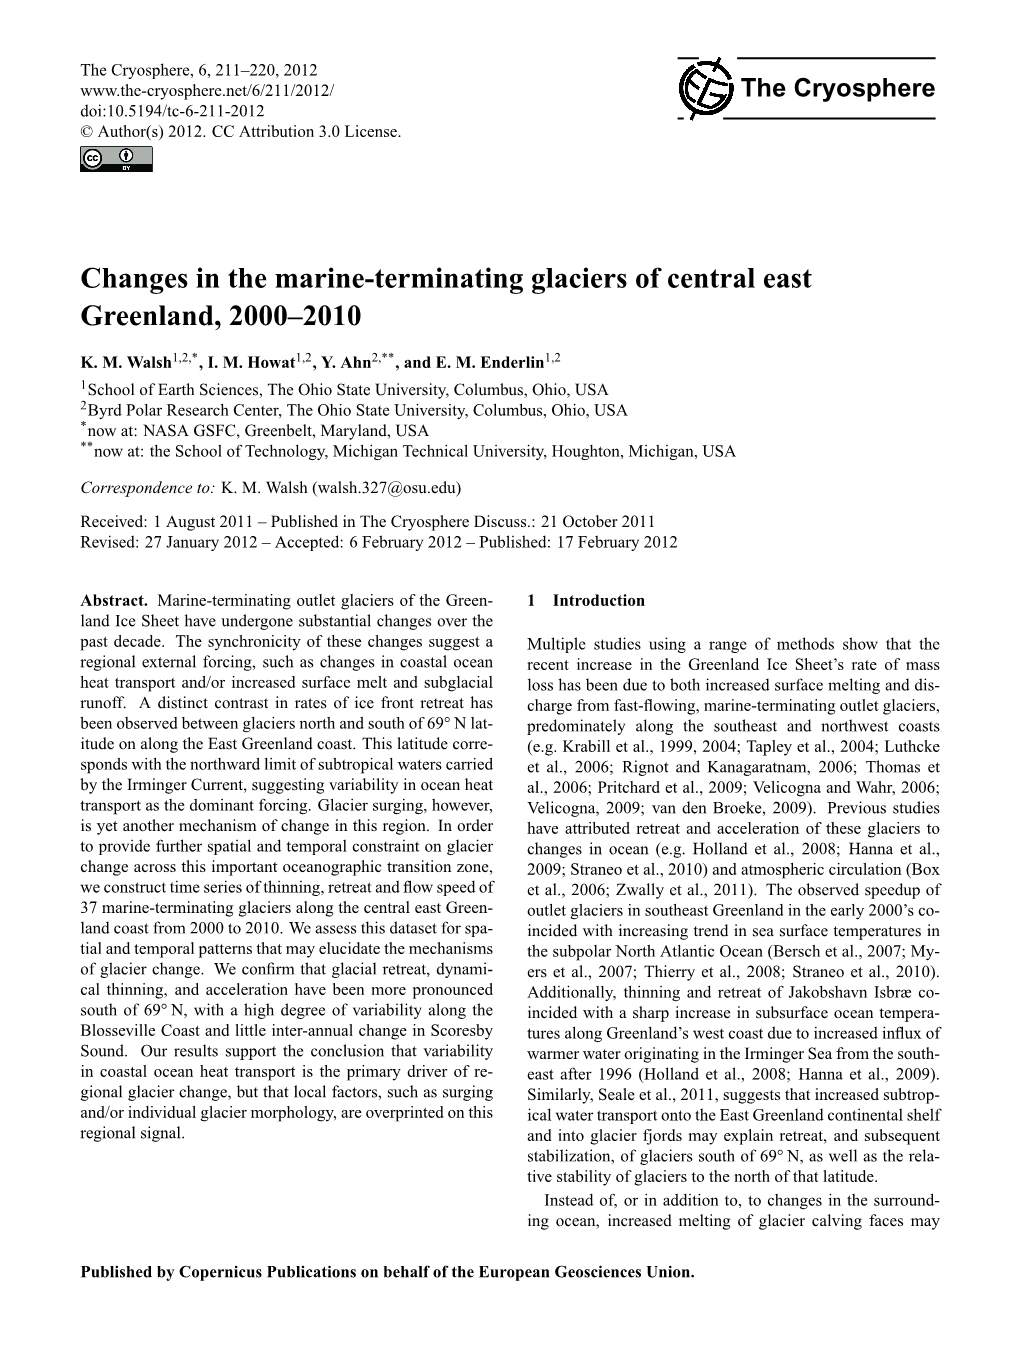 Changes in the Marine-Terminating Glaciers of Central East Greenland, 2000–2010